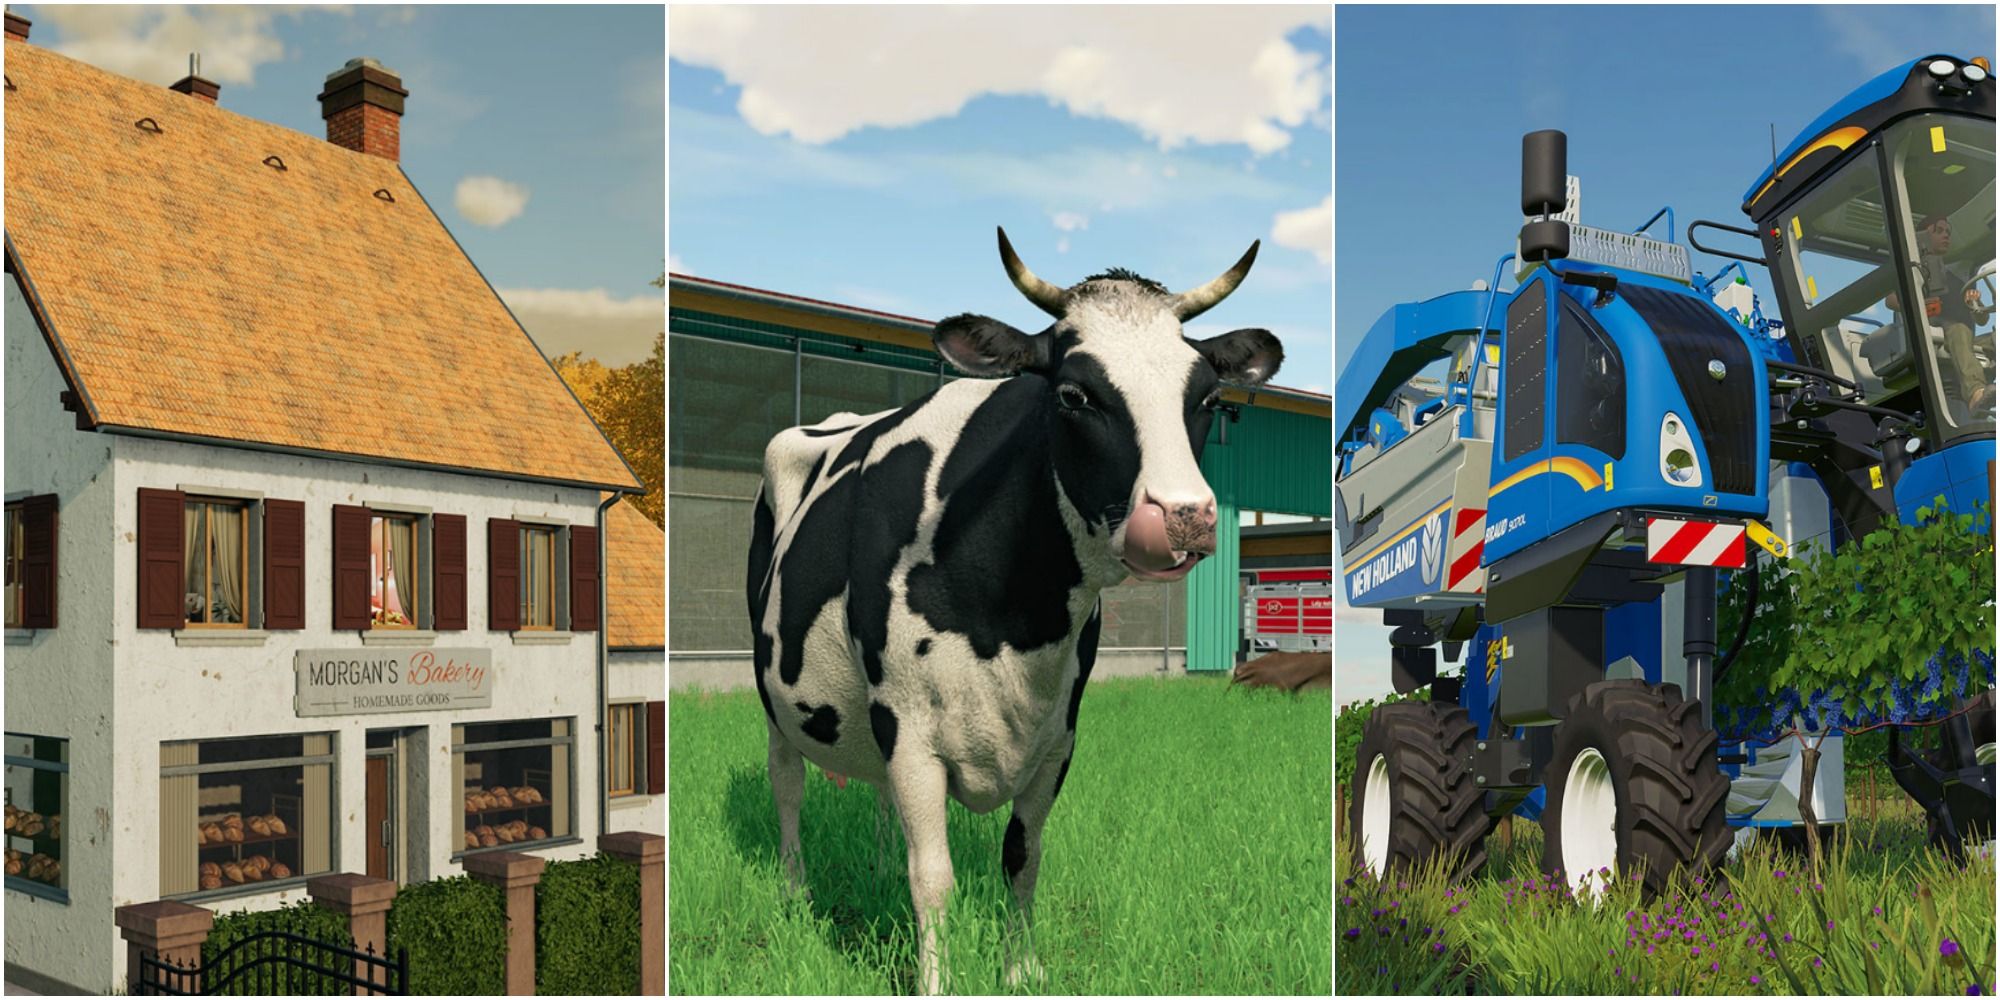 Discover Ranch Simulator: A New Frontier In Animal Farming Games 